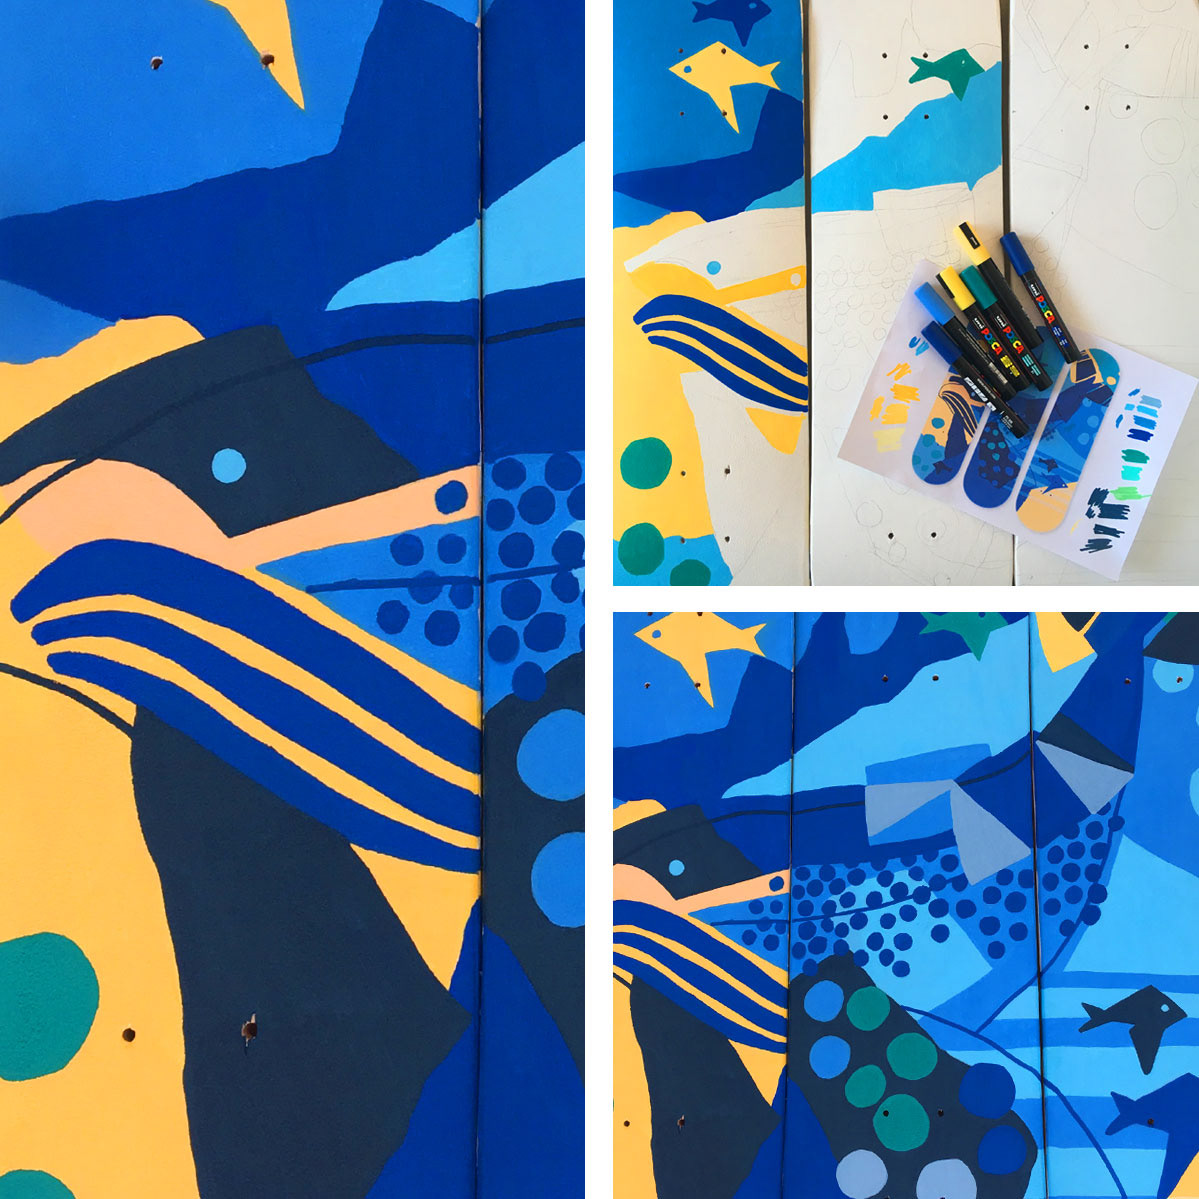 Geometric Abstract Art with Posca Markers, Pattern Design